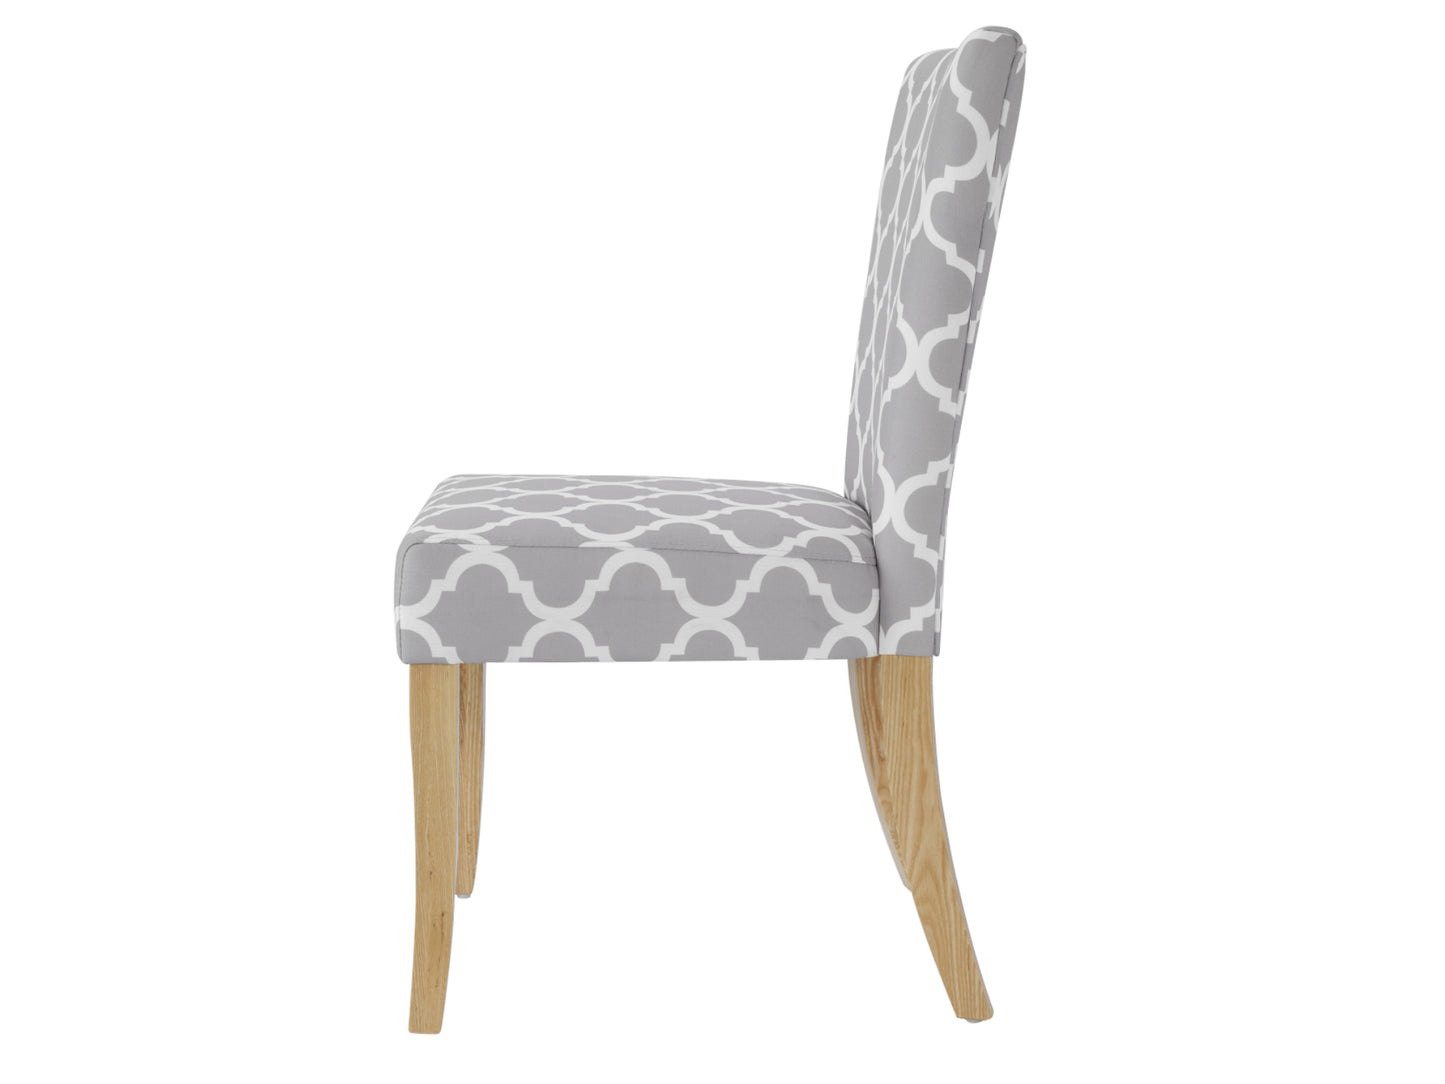 Hugo Patterned Dining Chair (2 Pack)